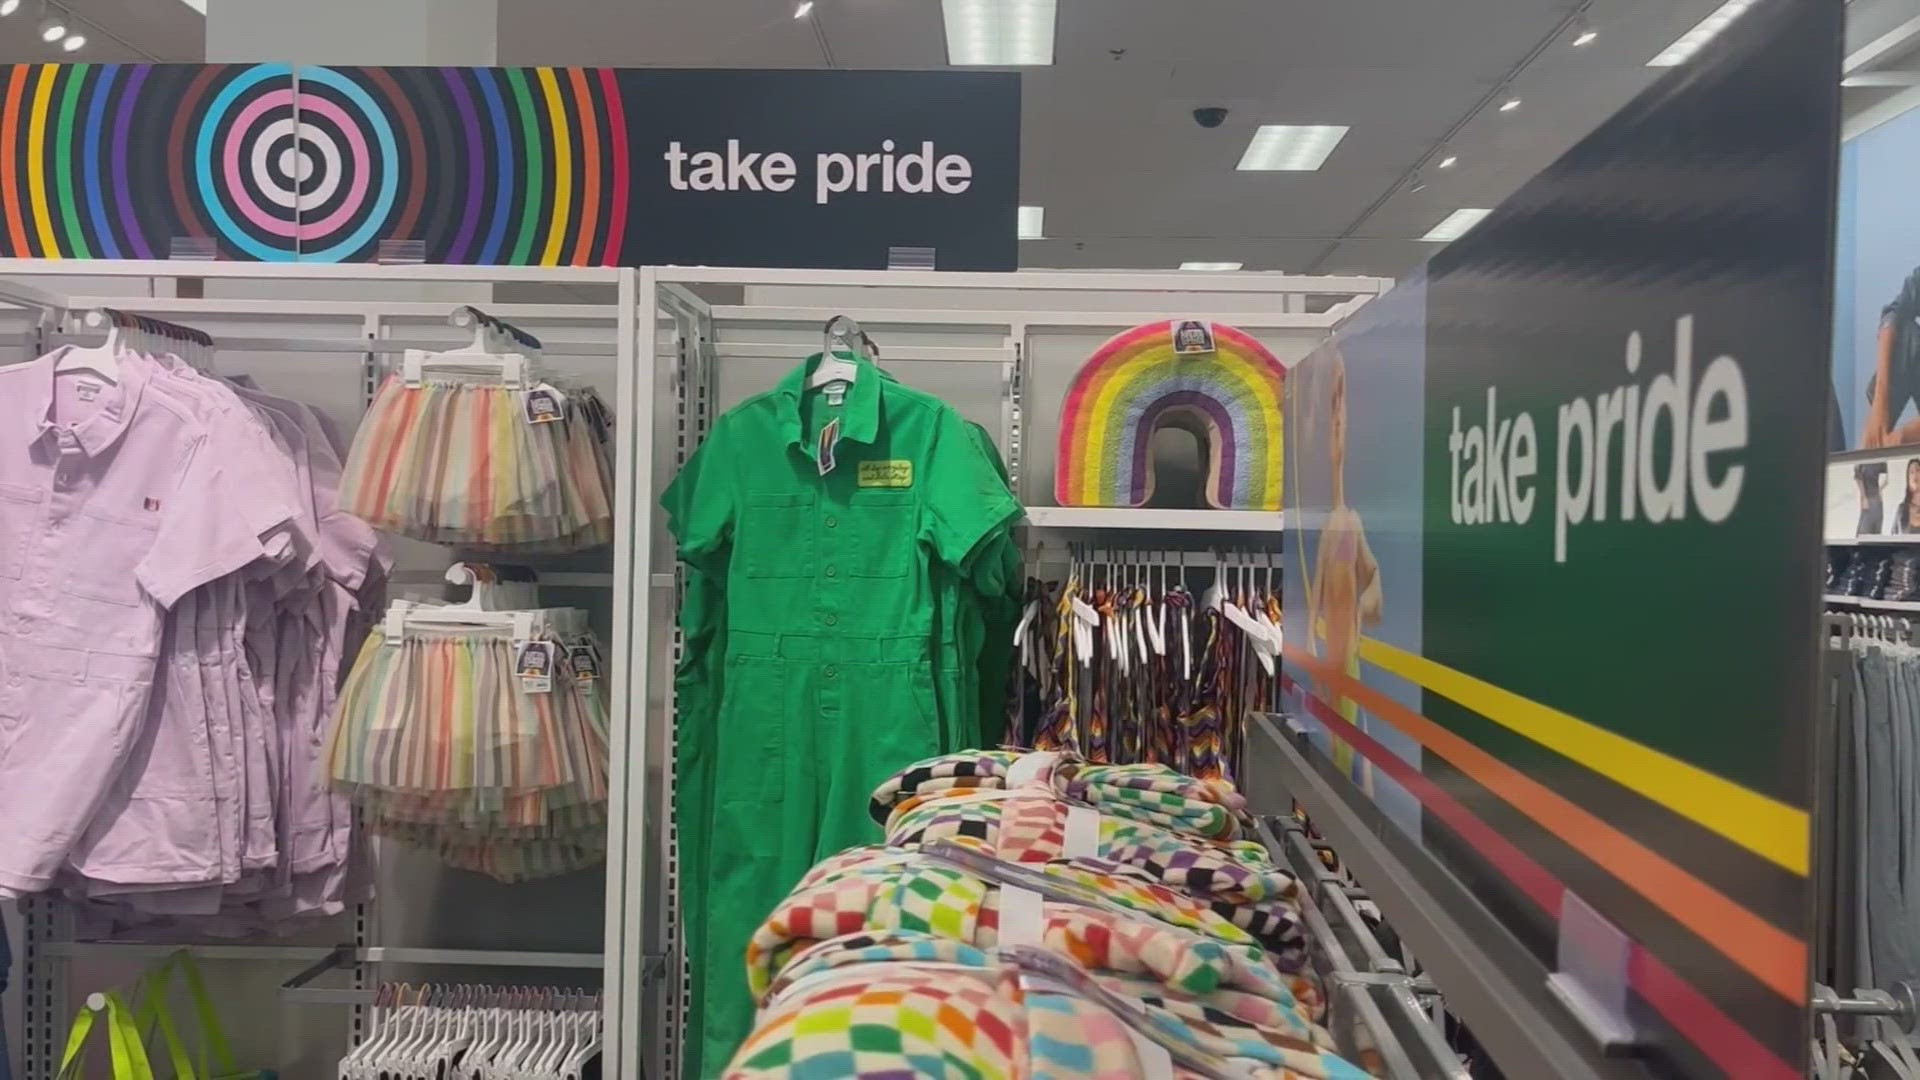 Target has also moved Pride merchandise from the front to the back of some Southern stores after confrontations and backlash from shoppers in those areas.